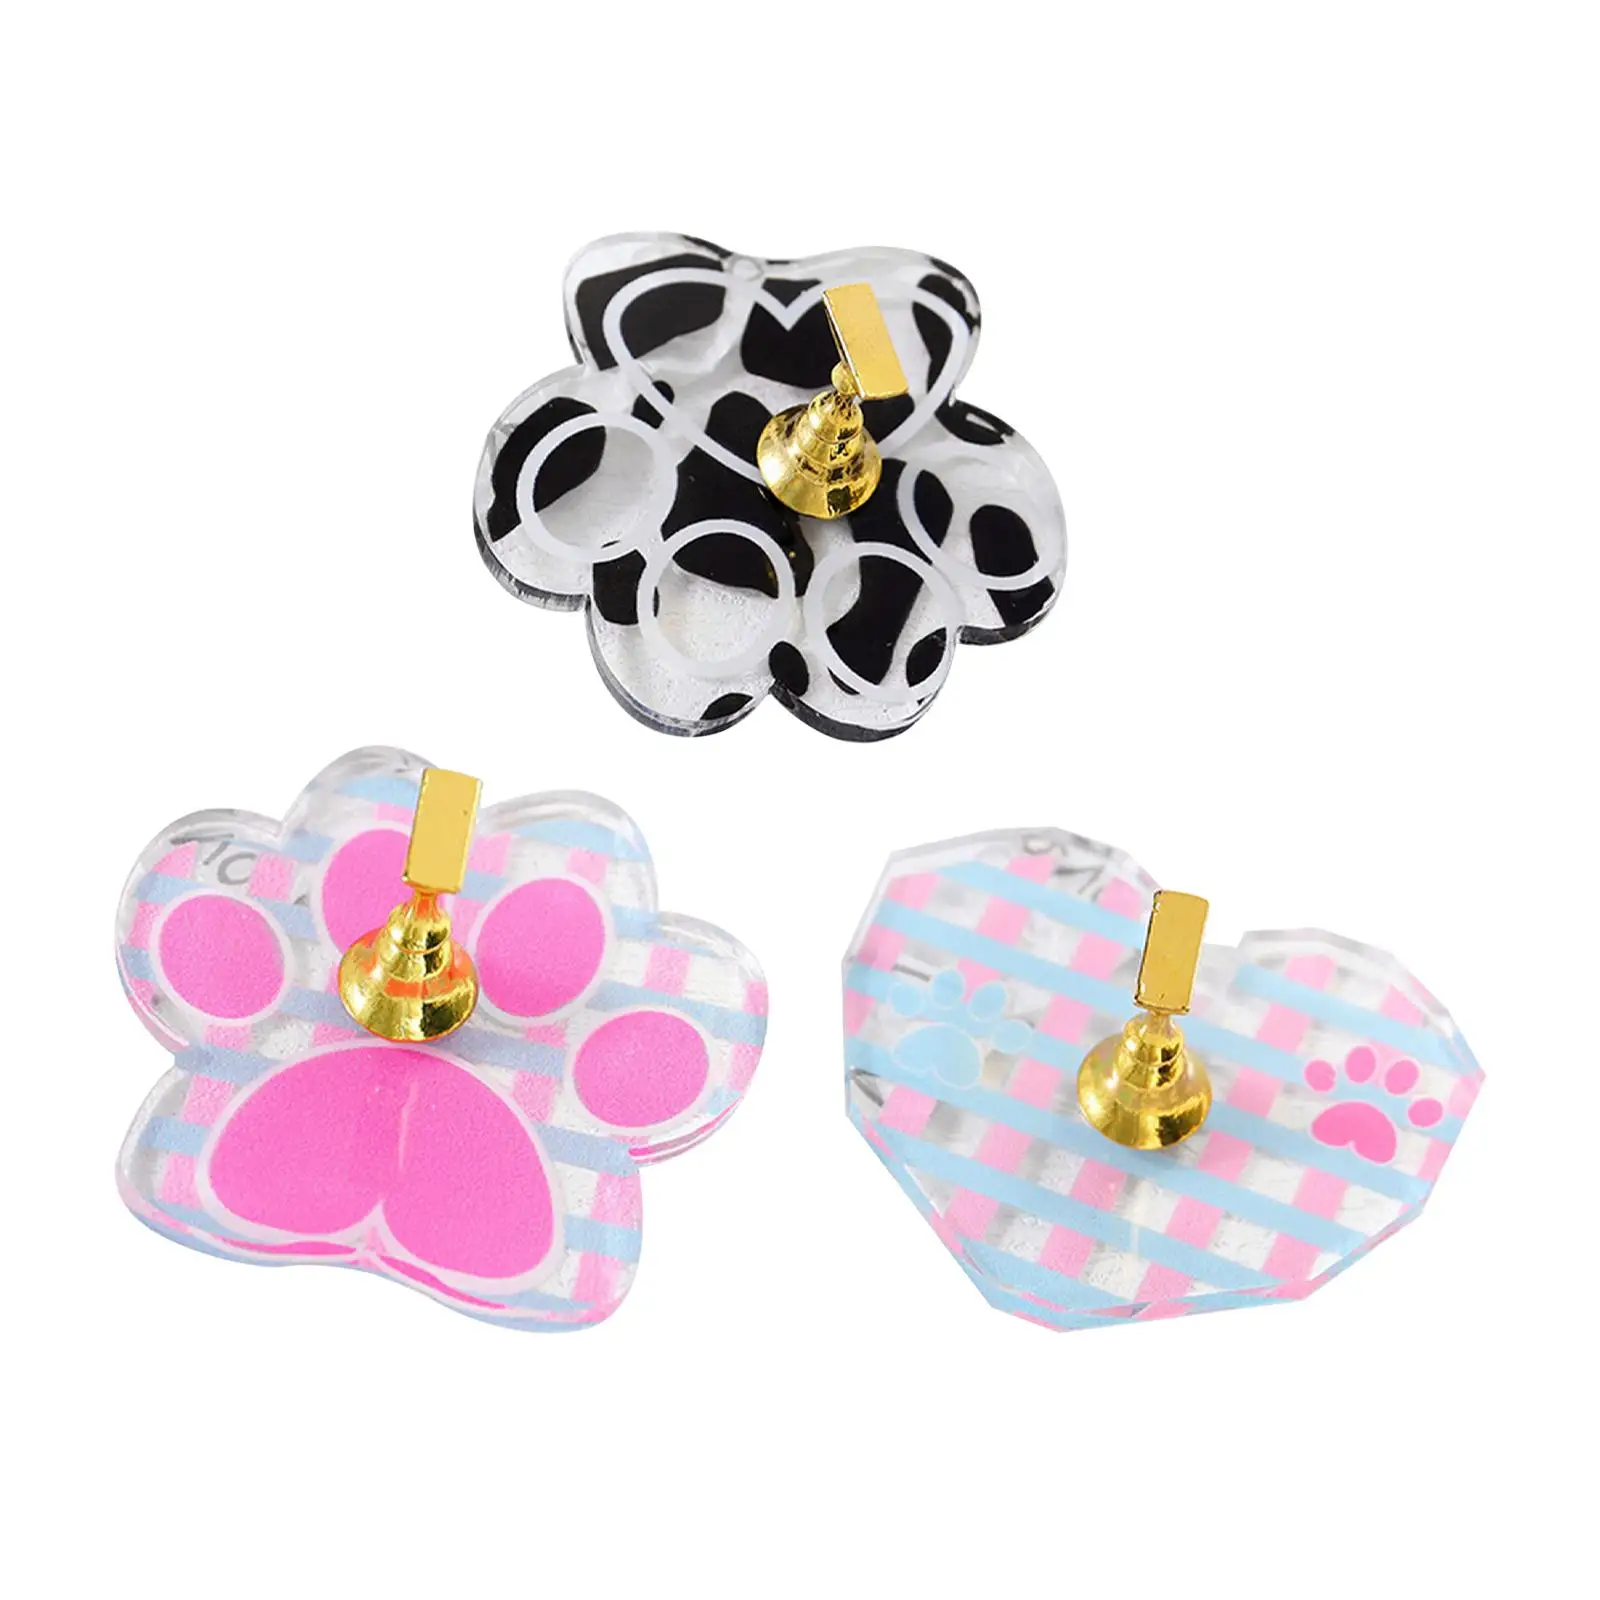 Cute Nail Art Practice Display Stand Magnetic Acrylic Nail Tips Holder